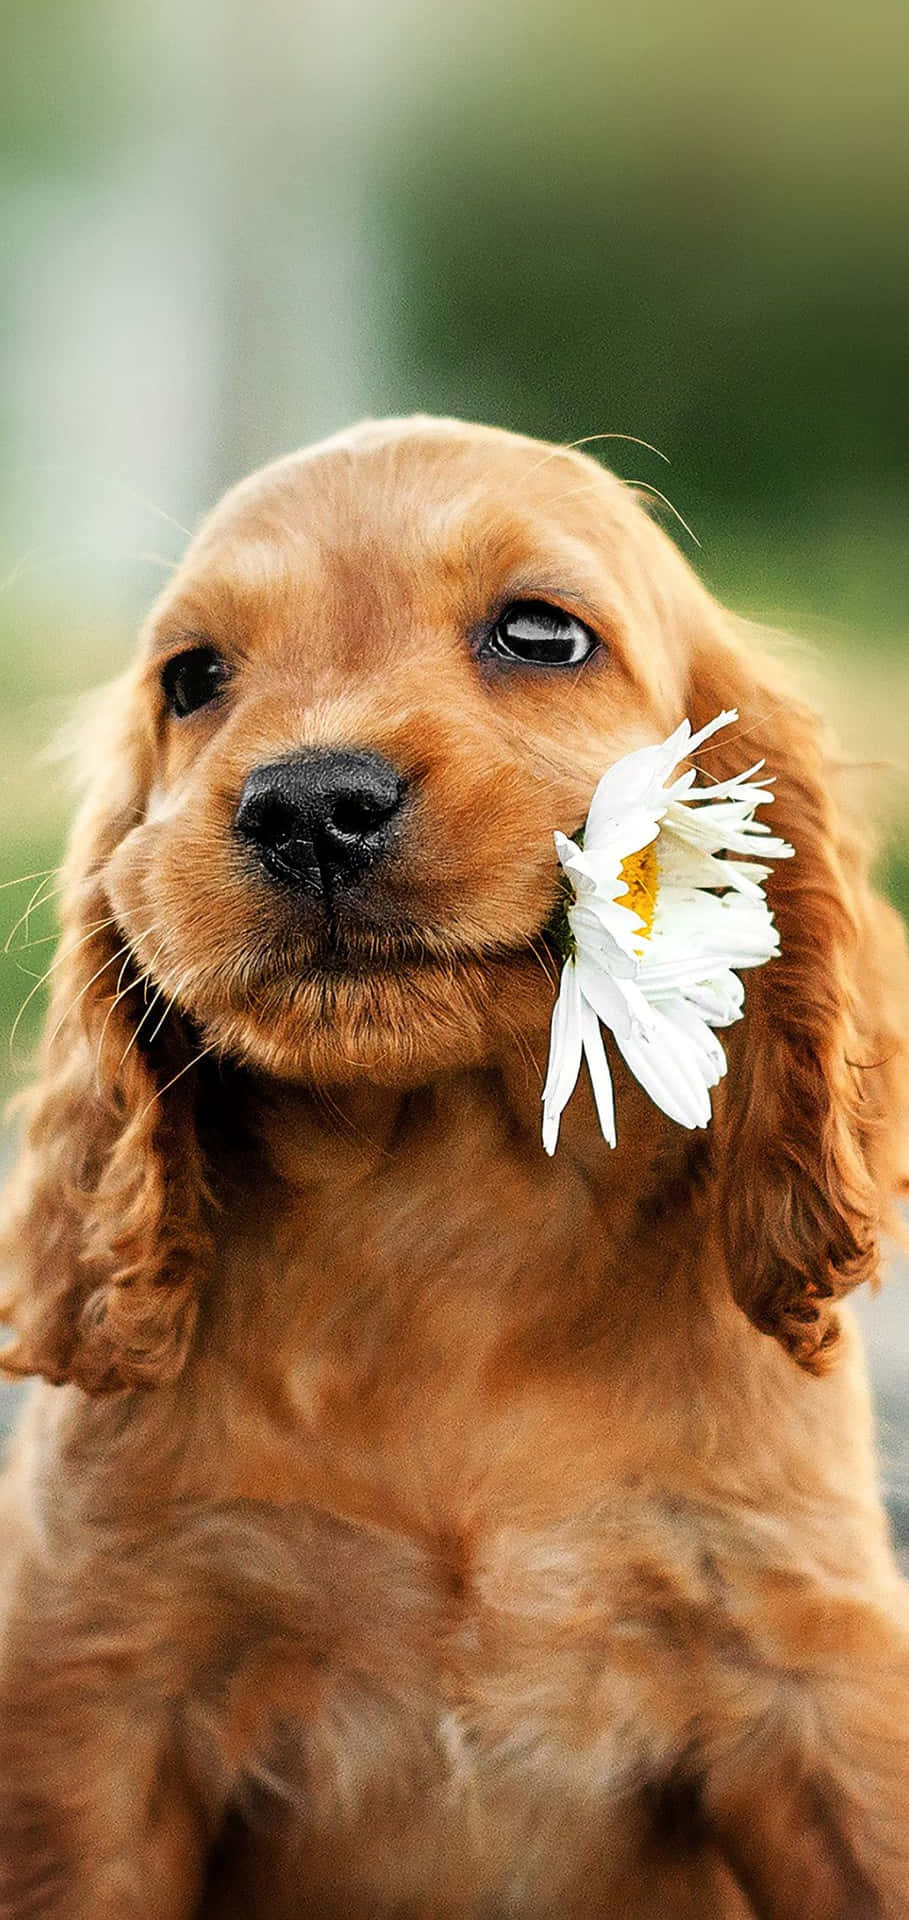 A Brown Dog With A Flower In Its Mouth Wallpaper